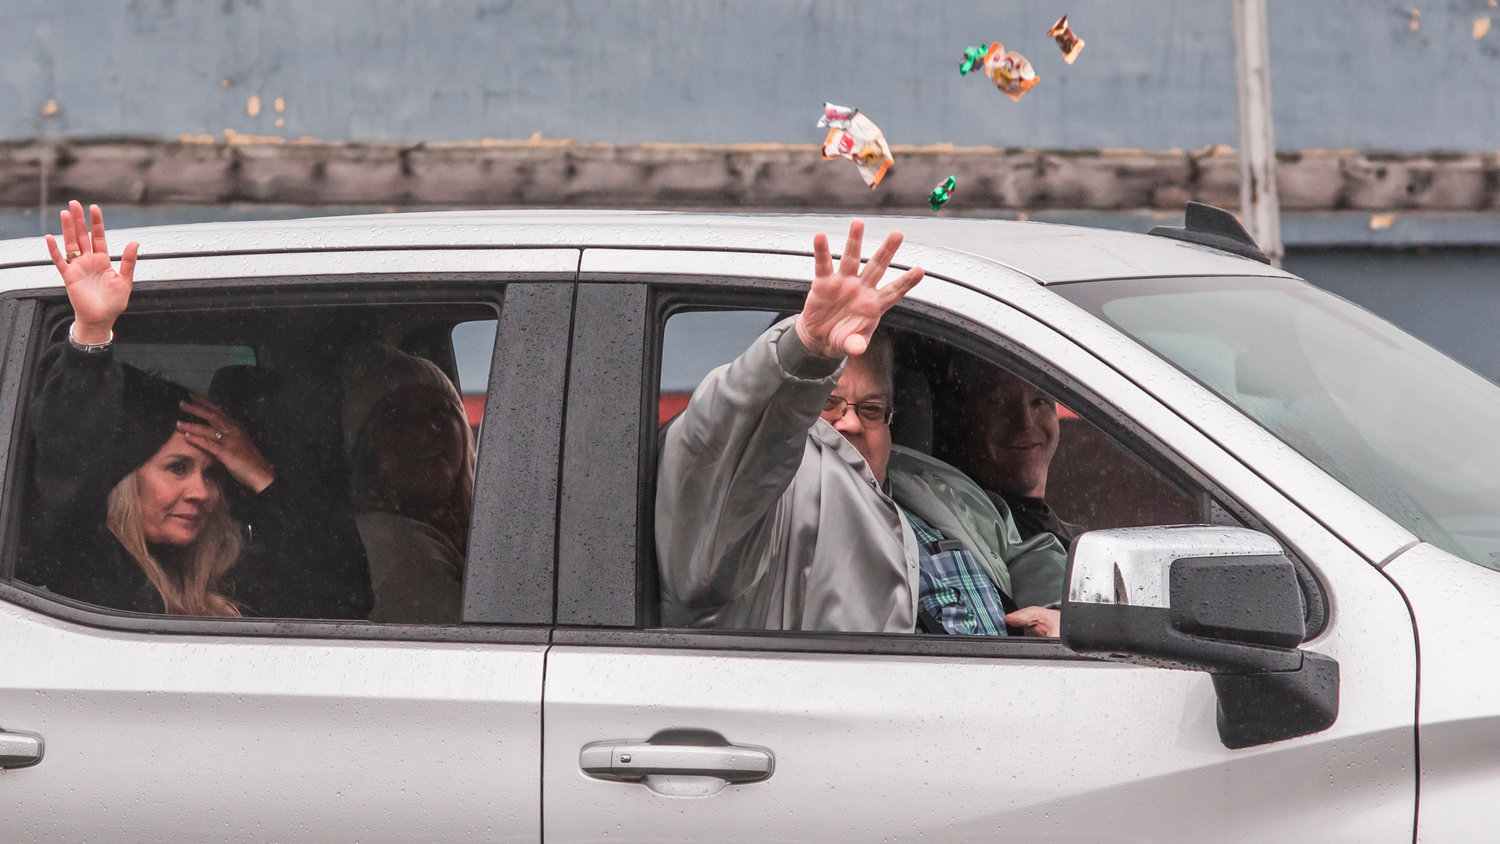 Grand Marshall Daryl Lund throws candy during the Santa Parade in downtown Chehalis on Saturday.